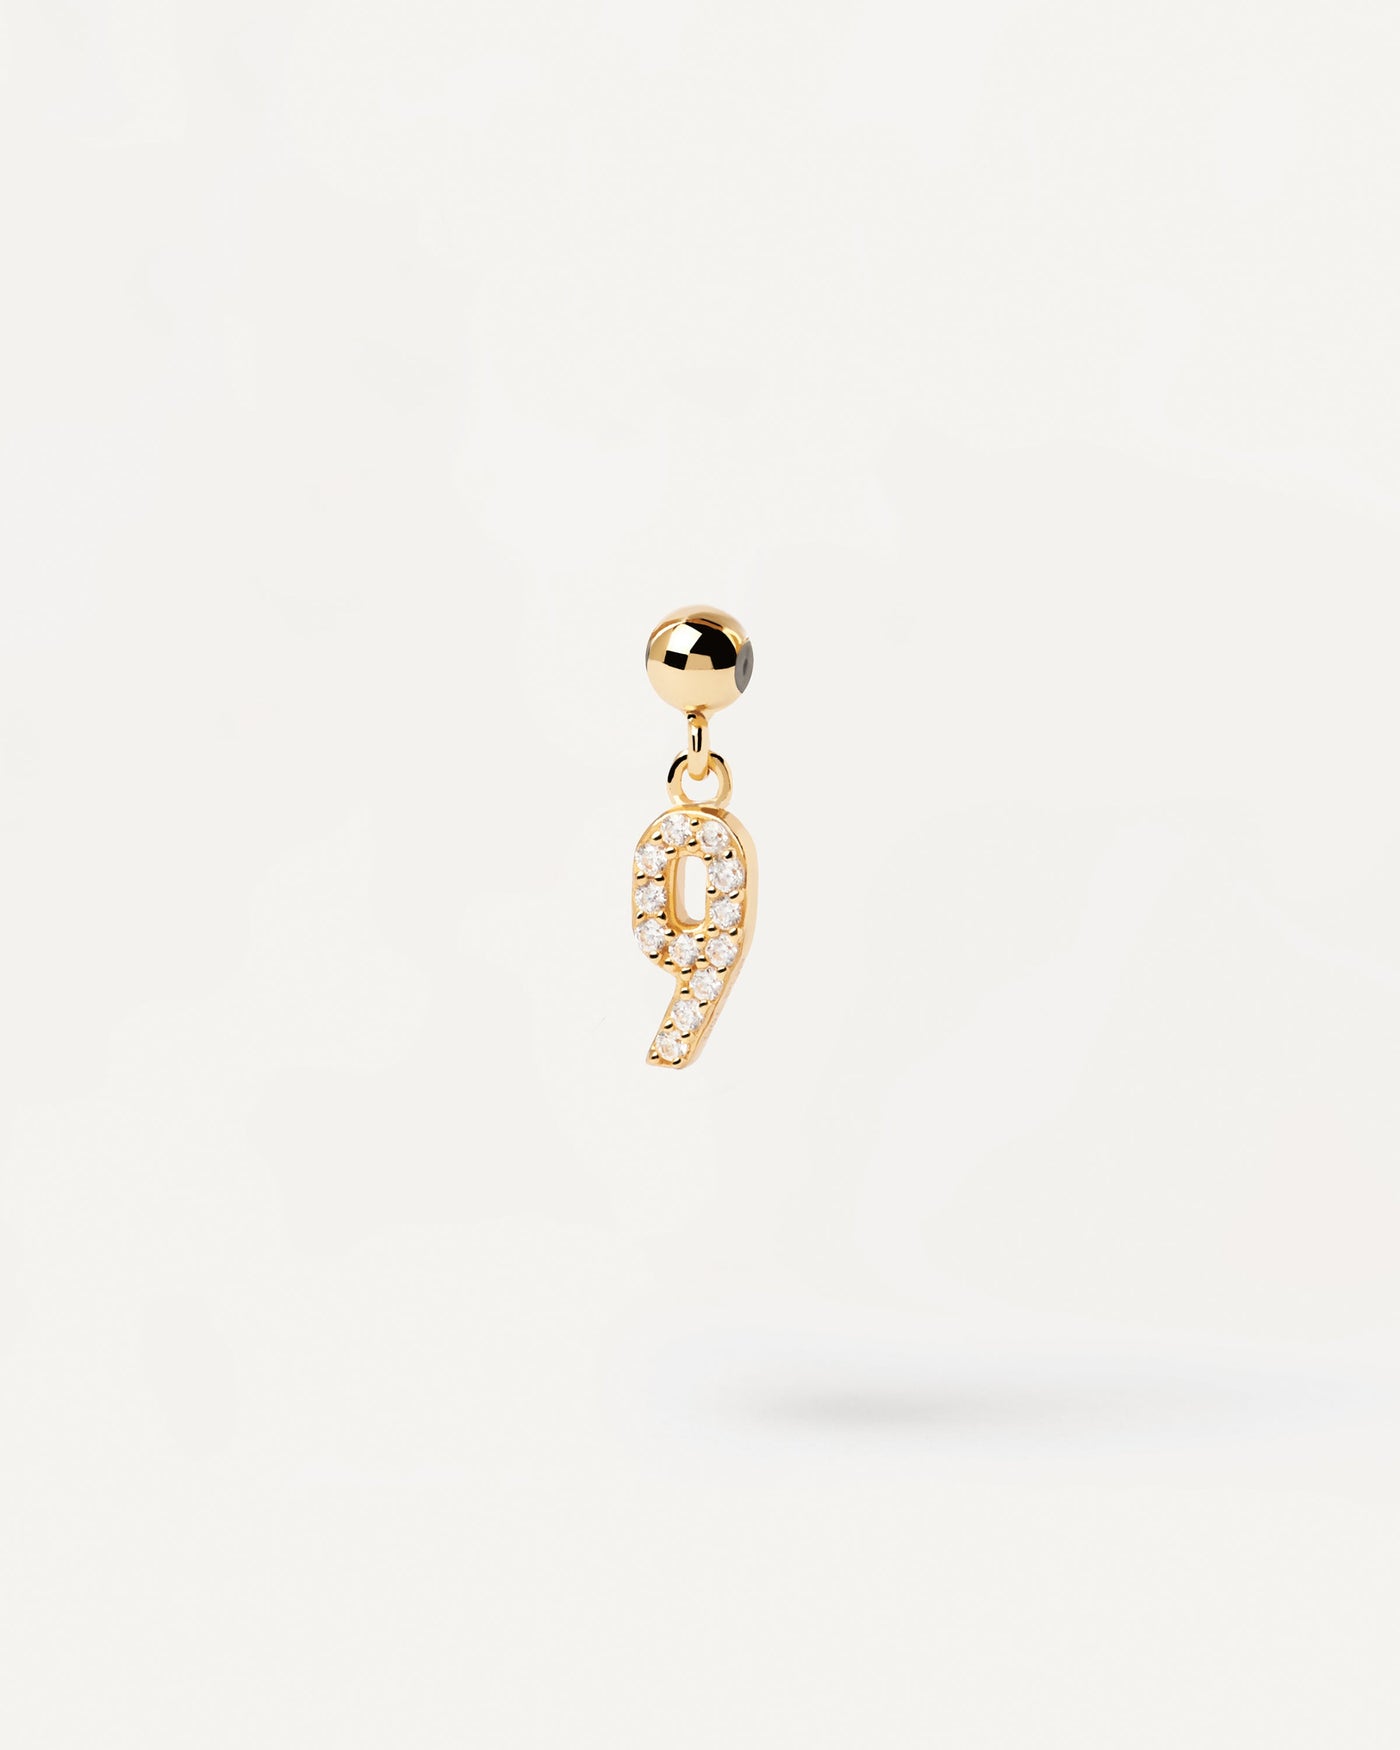 2023 Selection | Number 9 Charm. Gold-plated silver 9 number for Charm necklace or bracelet with white zirconia. Get the latest arrival from PDPAOLA. Place your order safely and get this Best Seller. Free Shipping.